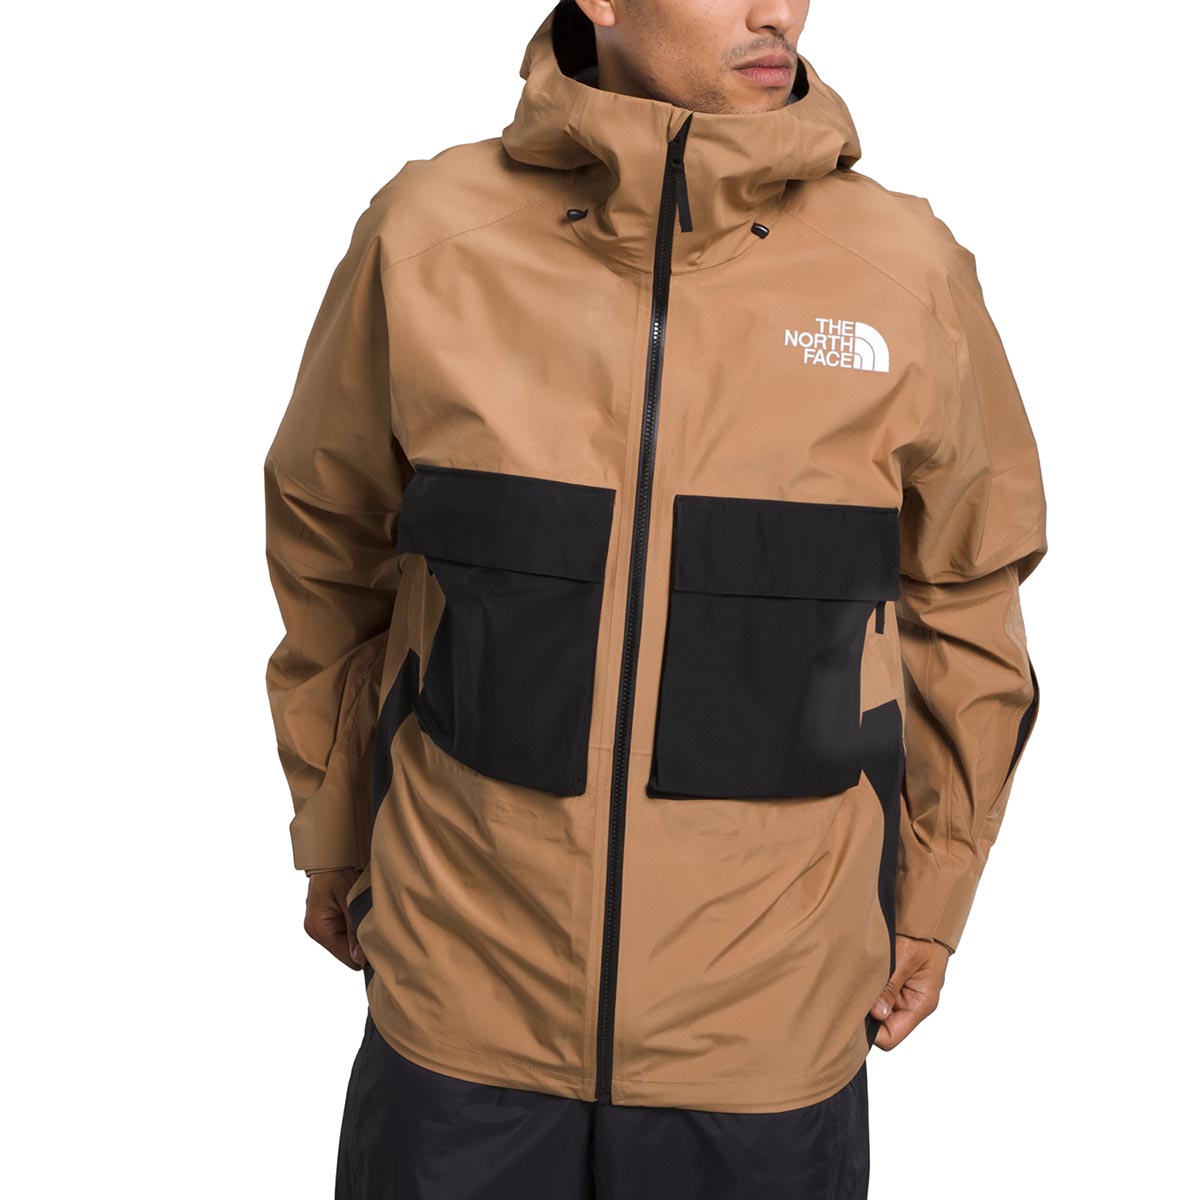 THE NORTH FACE - SIDECUT GORE-TEX JACKET